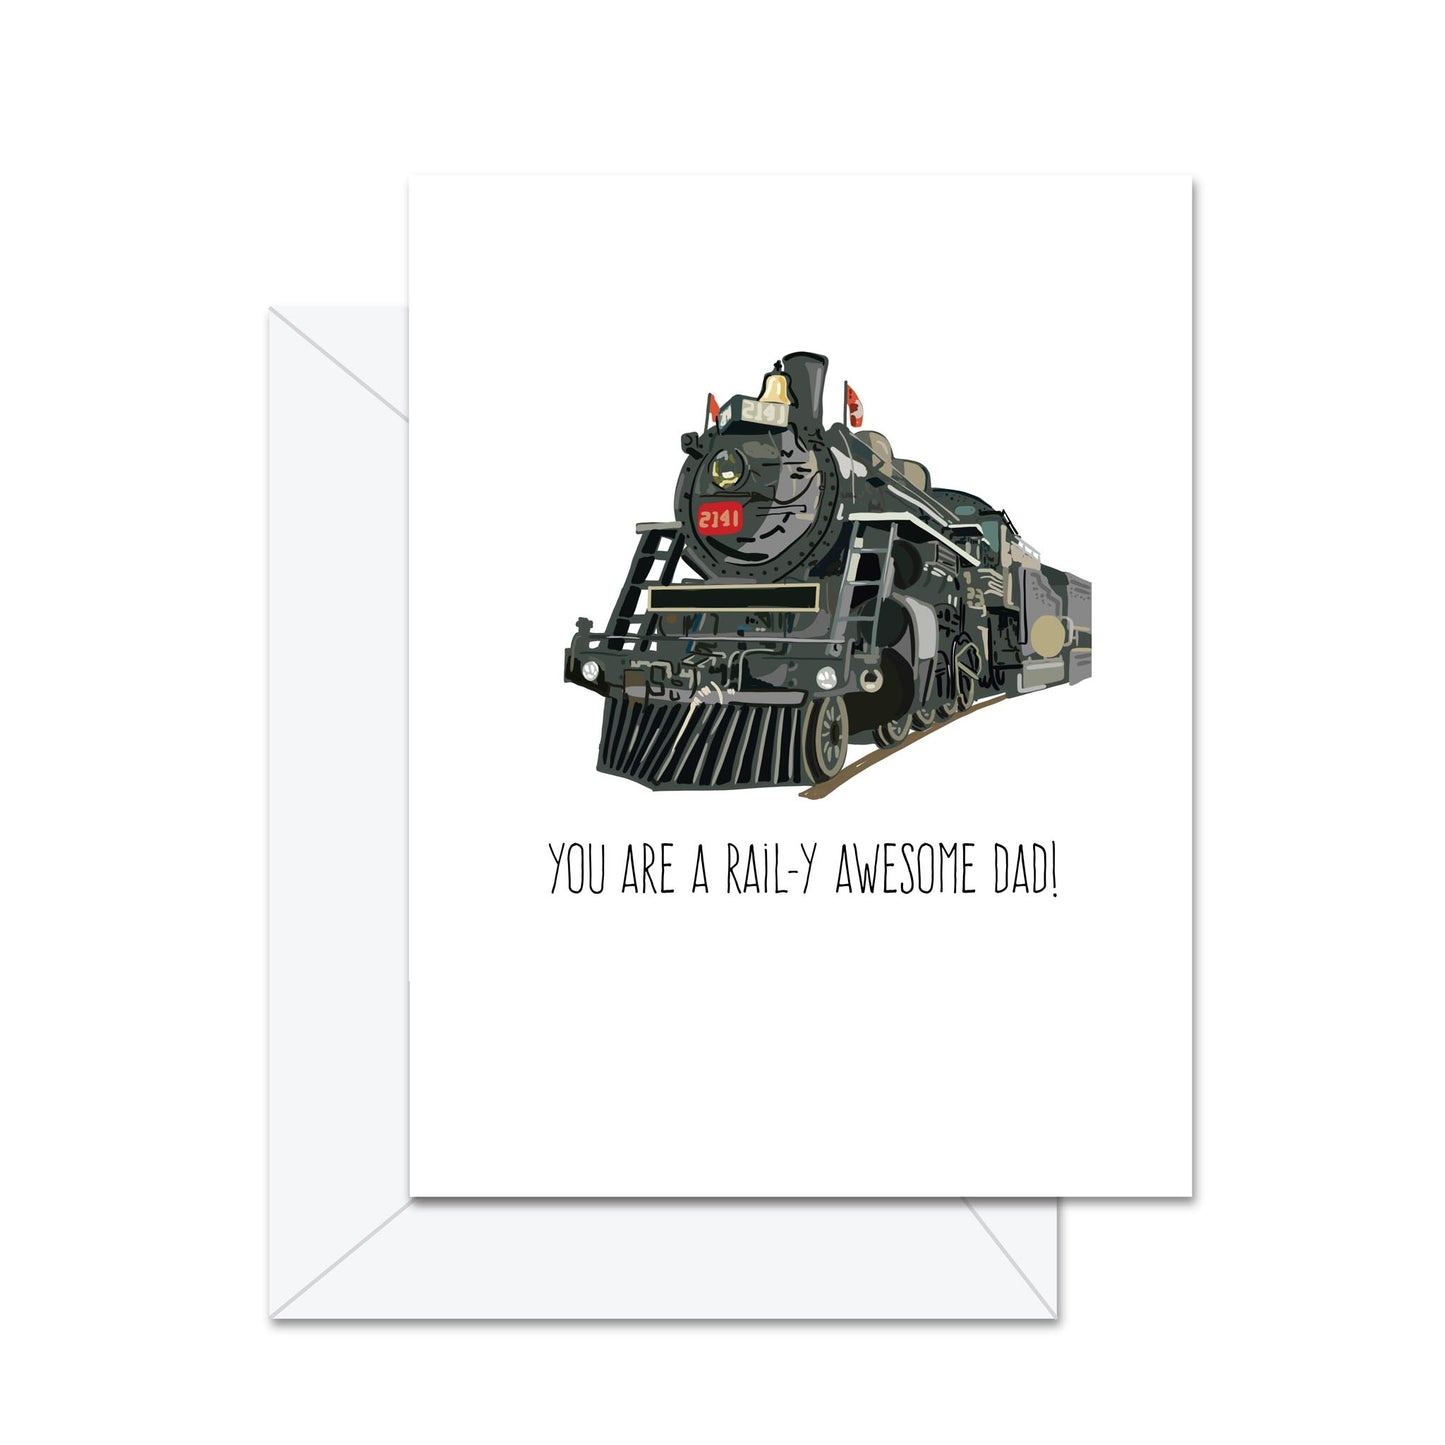 You Are A Rail-y Awesome Dad! - Greeting Card